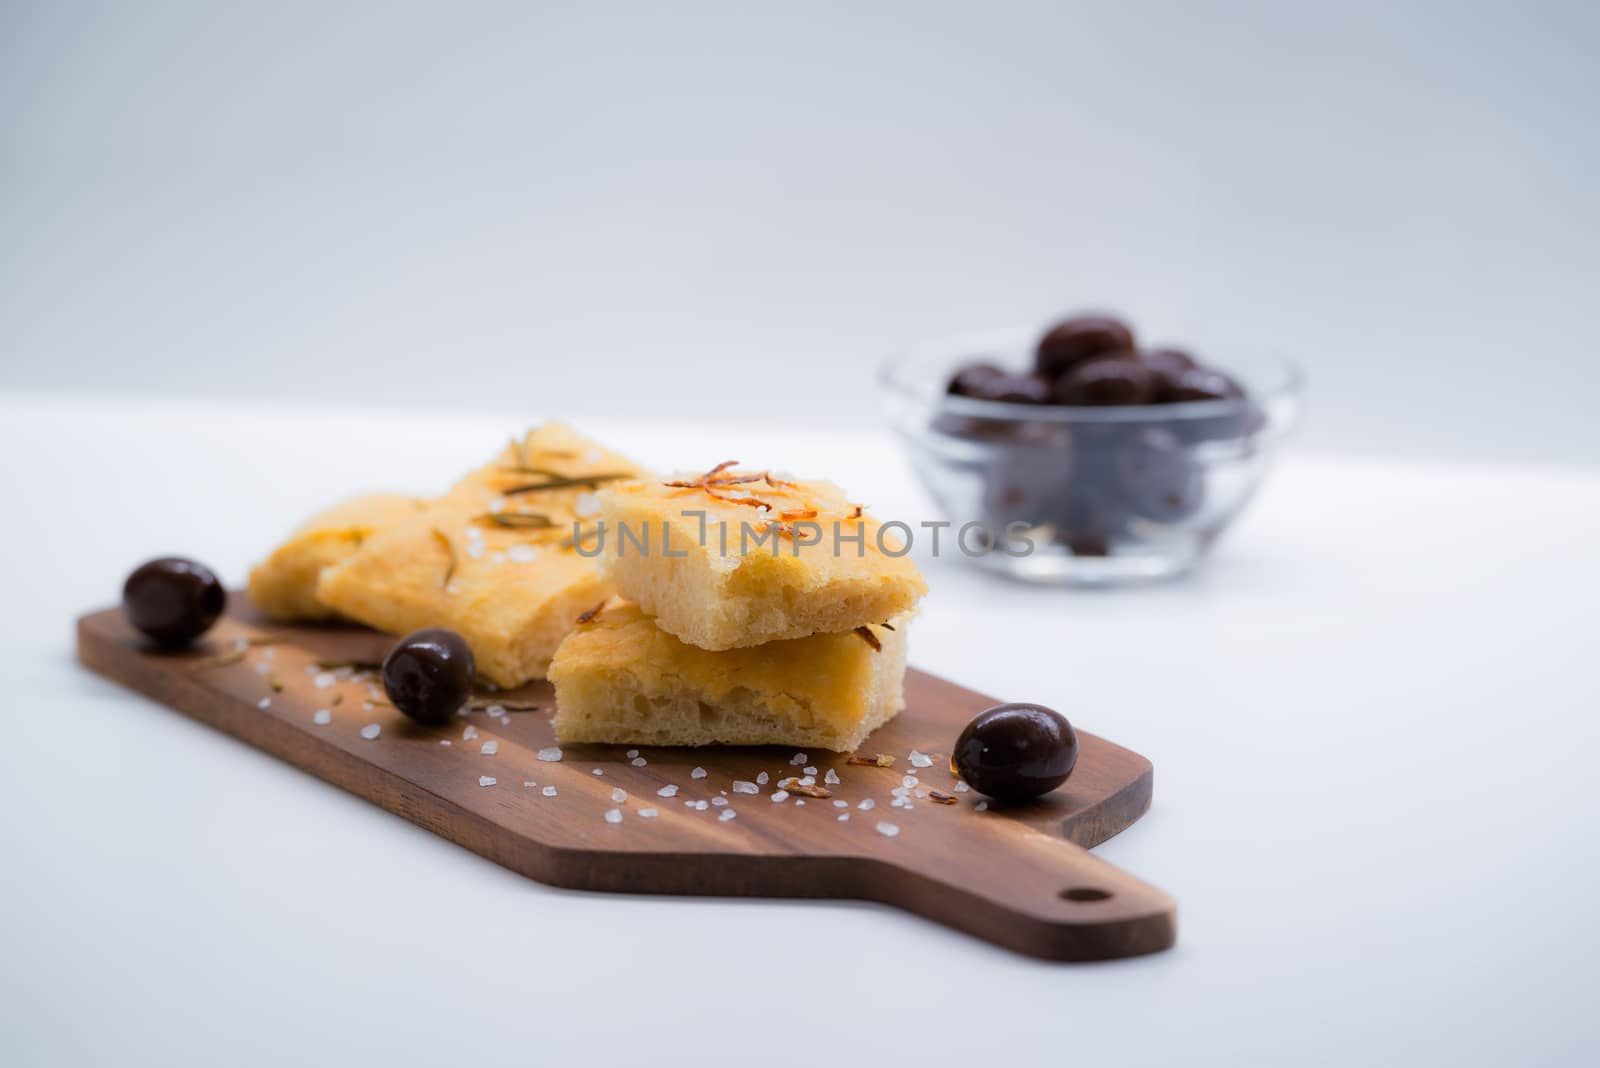 Italian focaccia with onion and olives by LuigiMorbidelli